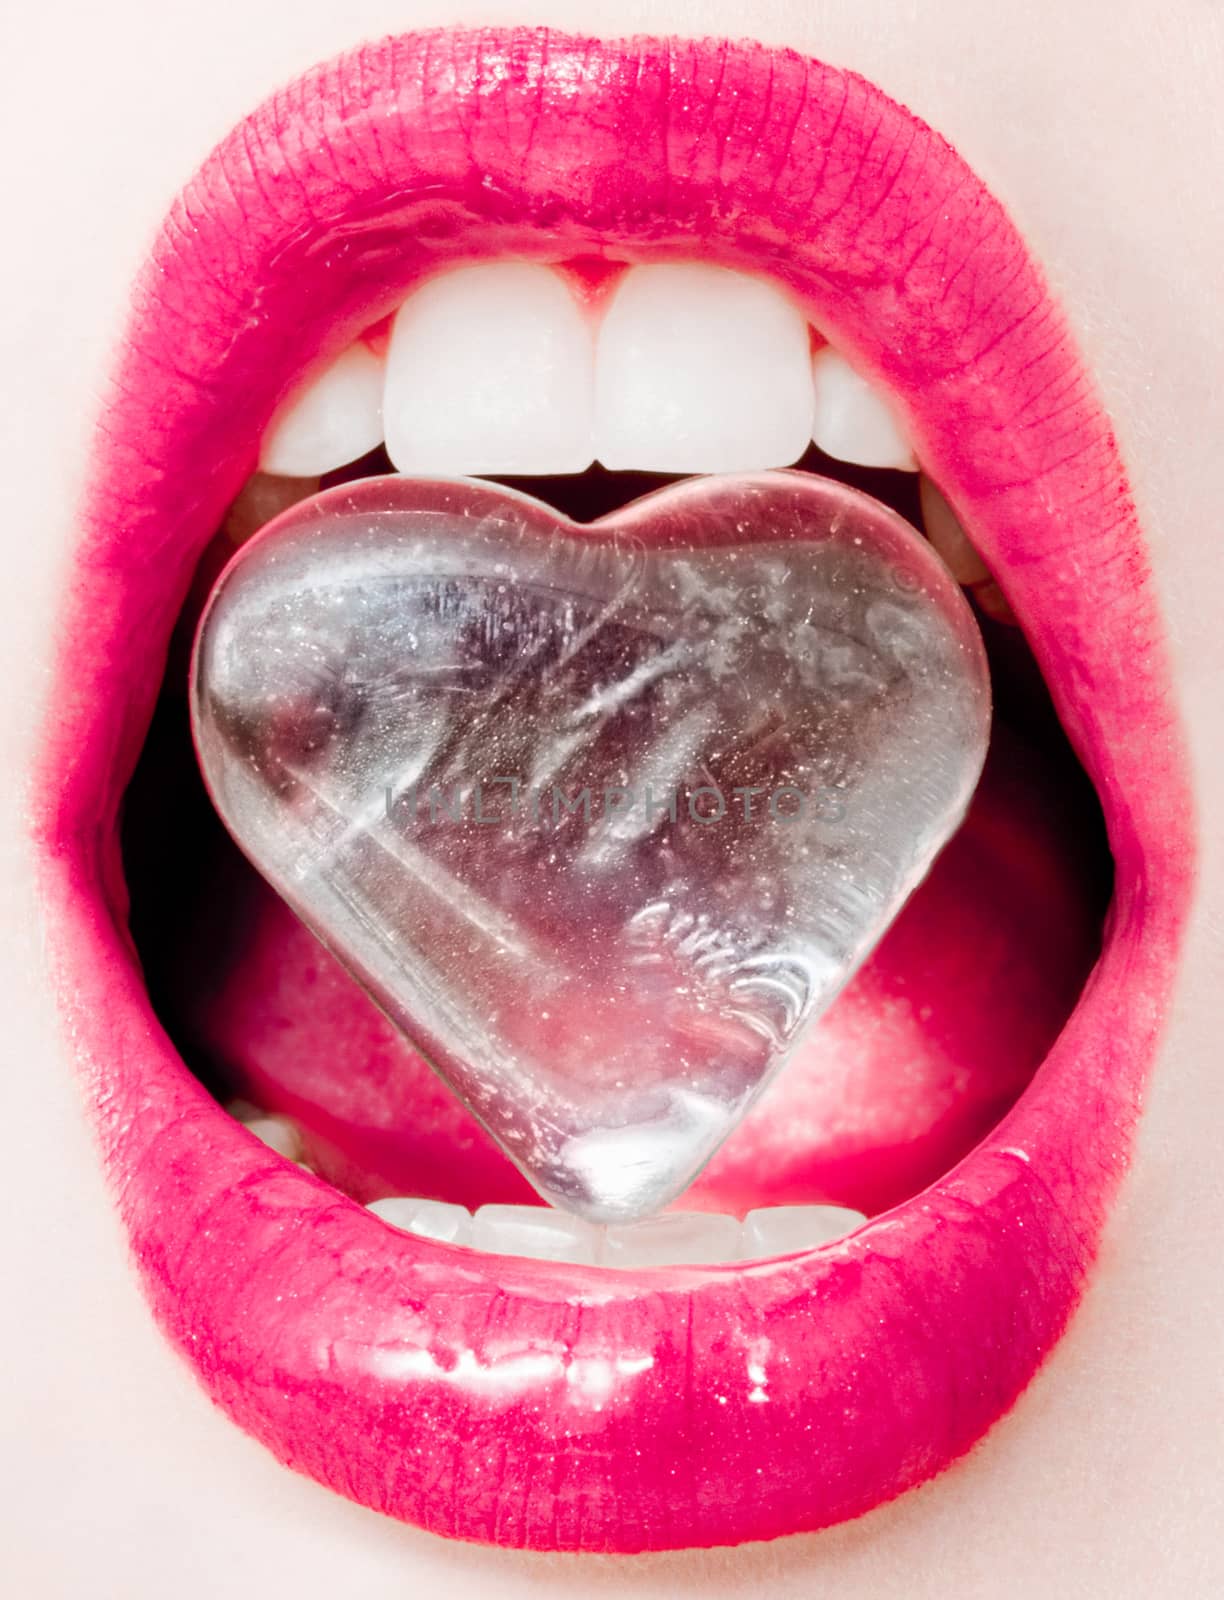 Icy heart, female lips with glossy lipstick and white teeth for  by Anneleven